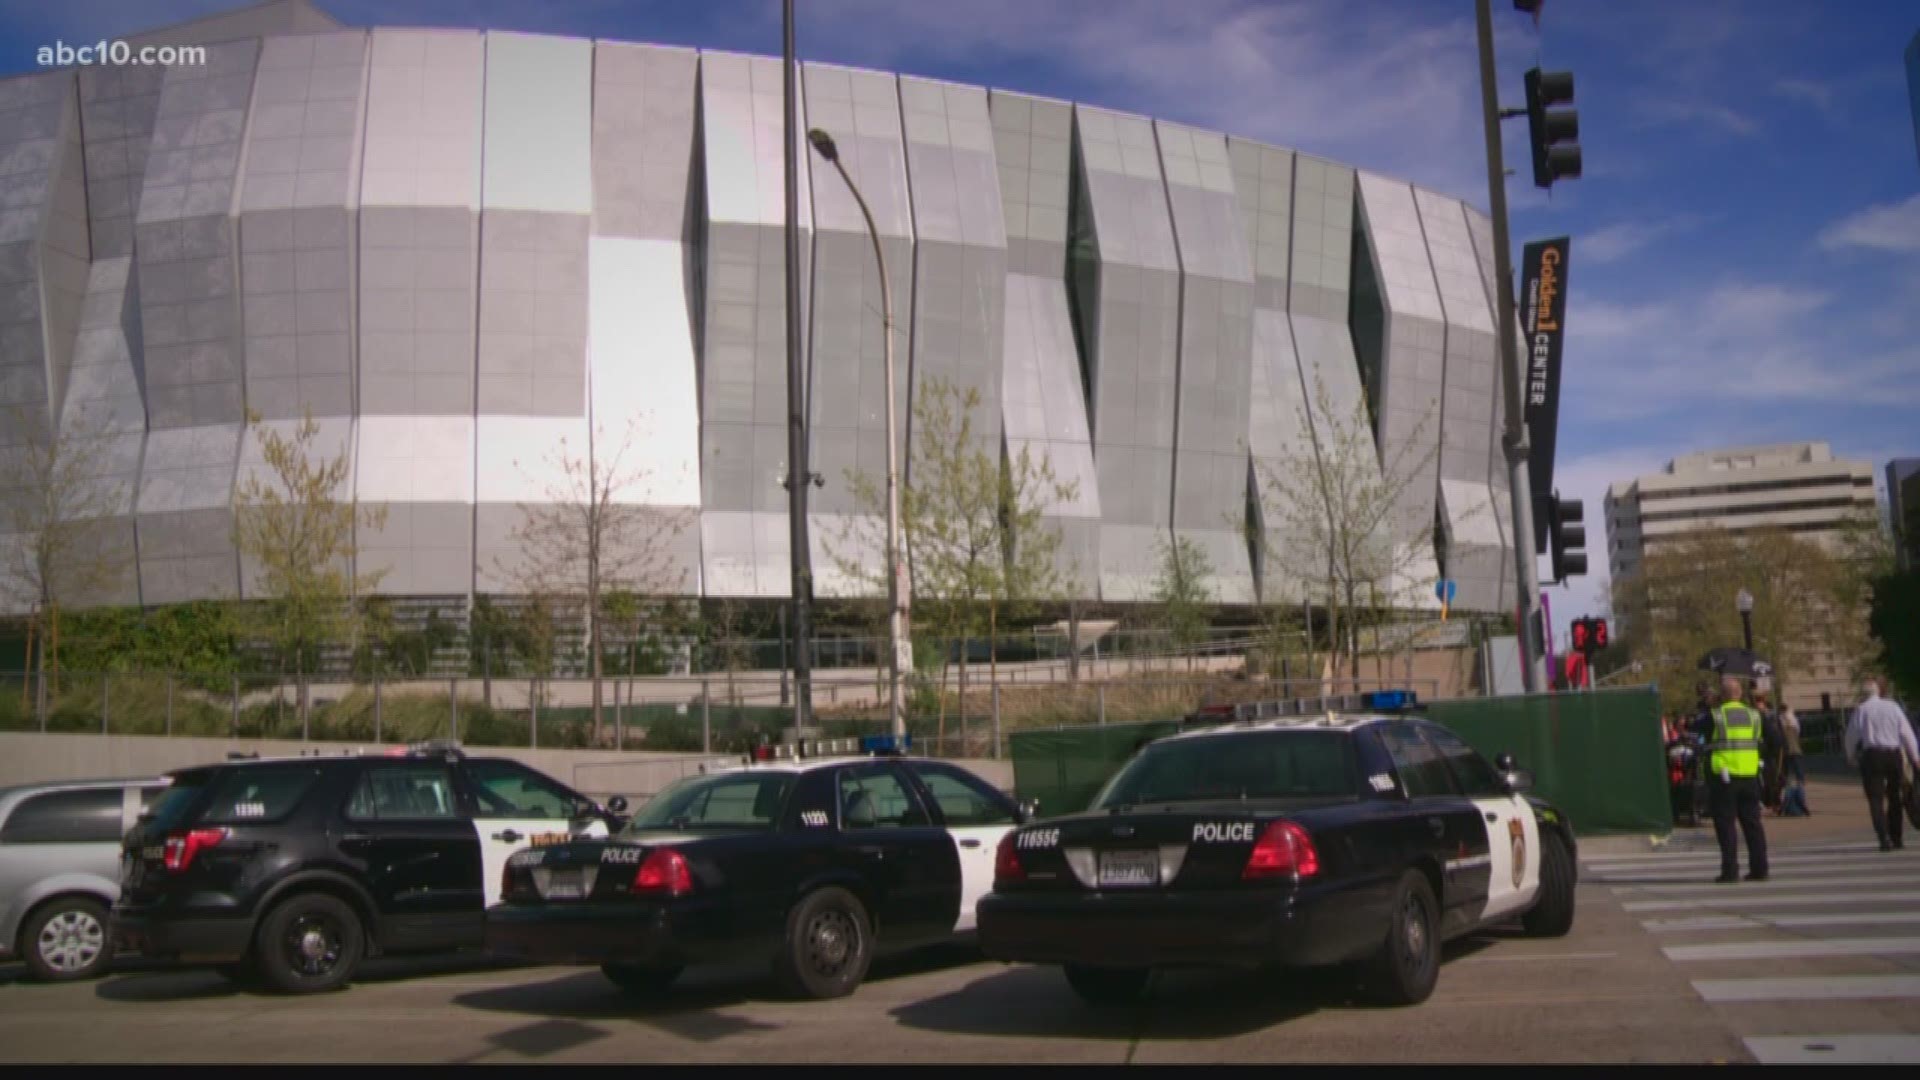 In a press release, the Kings said they'll continue to work with the Sacramento Police Department to ensure the safety of guests. (Mar. 30, 2018)